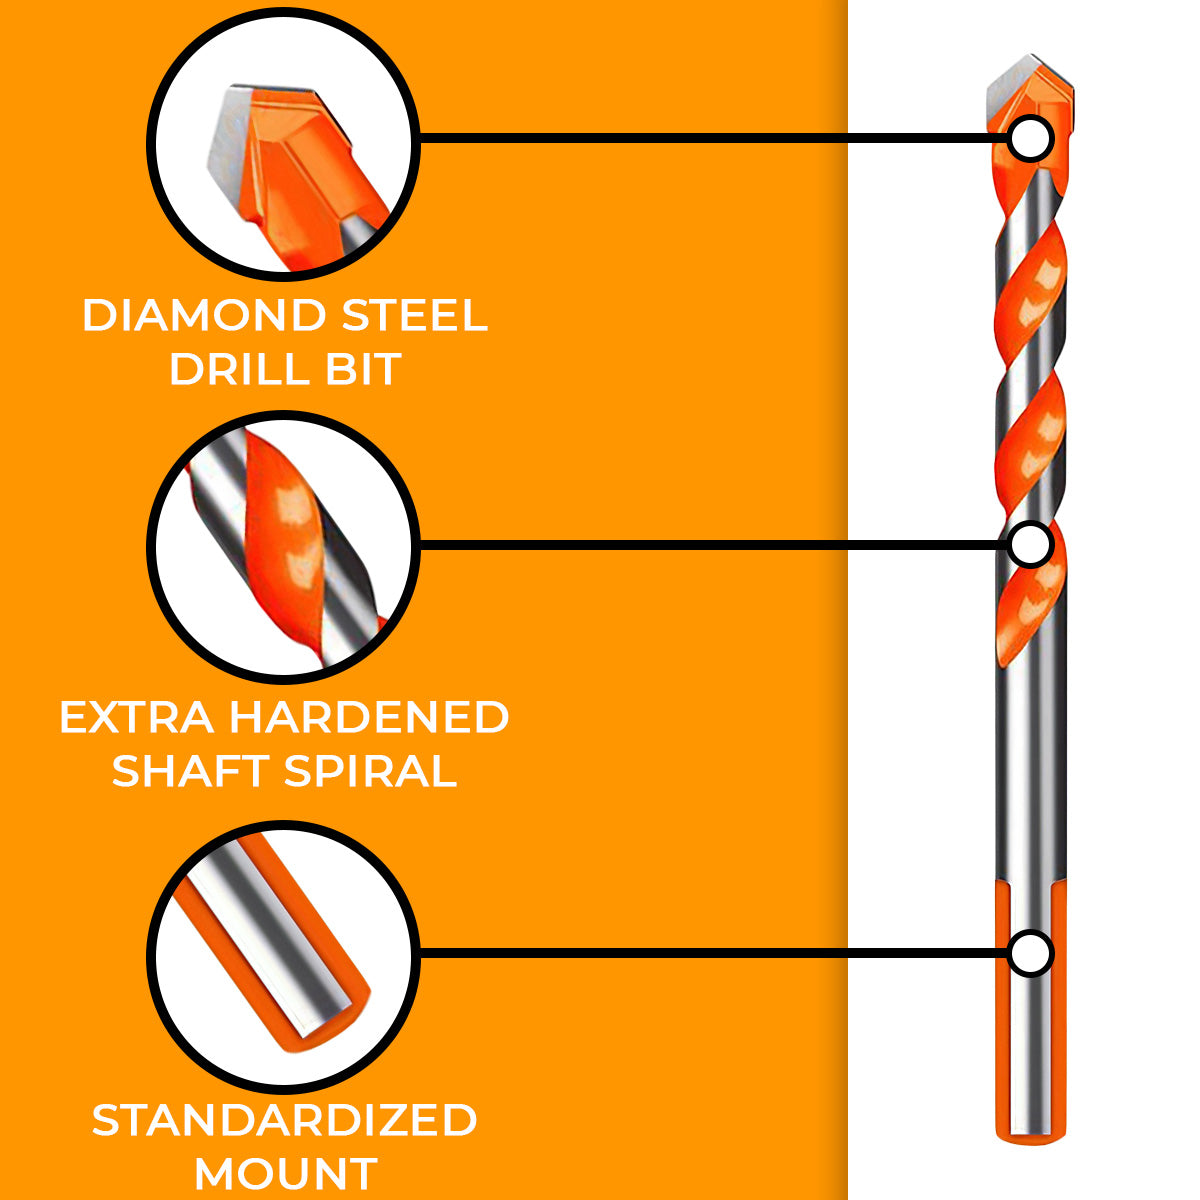 INDESTRUCTIBLE DRILLBITS™ - Drill any material in seconds